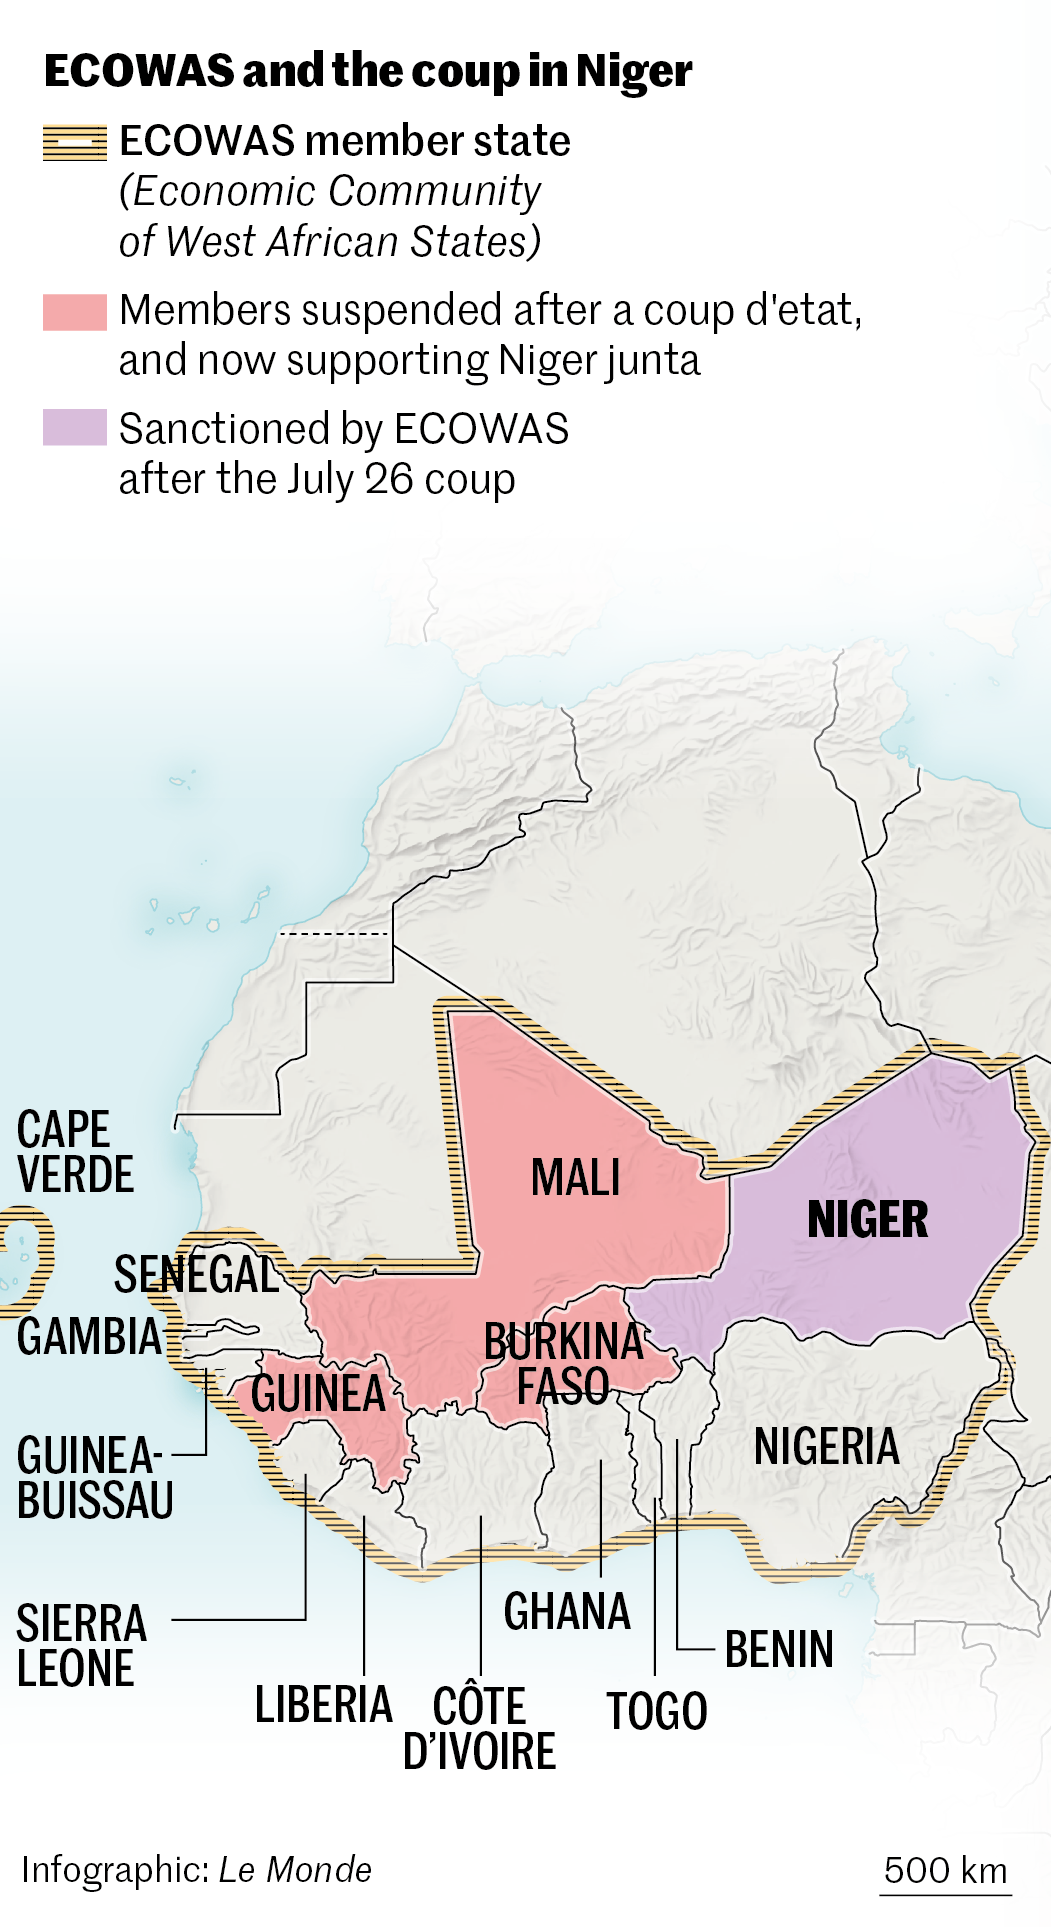 Niger: Six questions to understand the situation after the coup